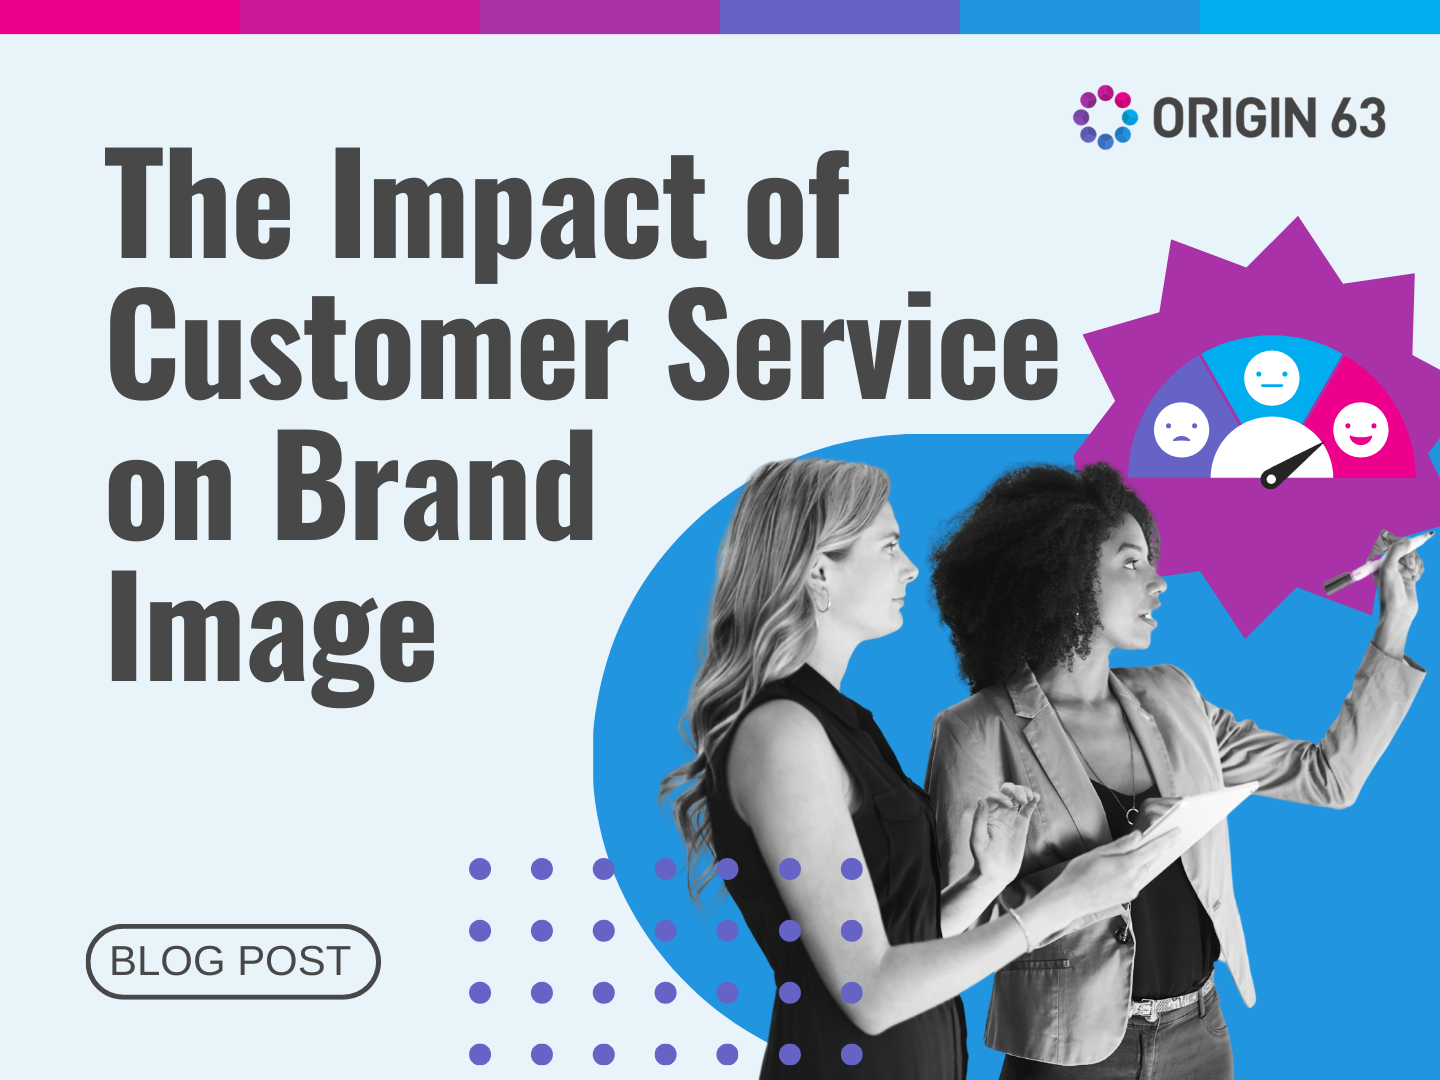 The Impact of Customer Service on Brand Image